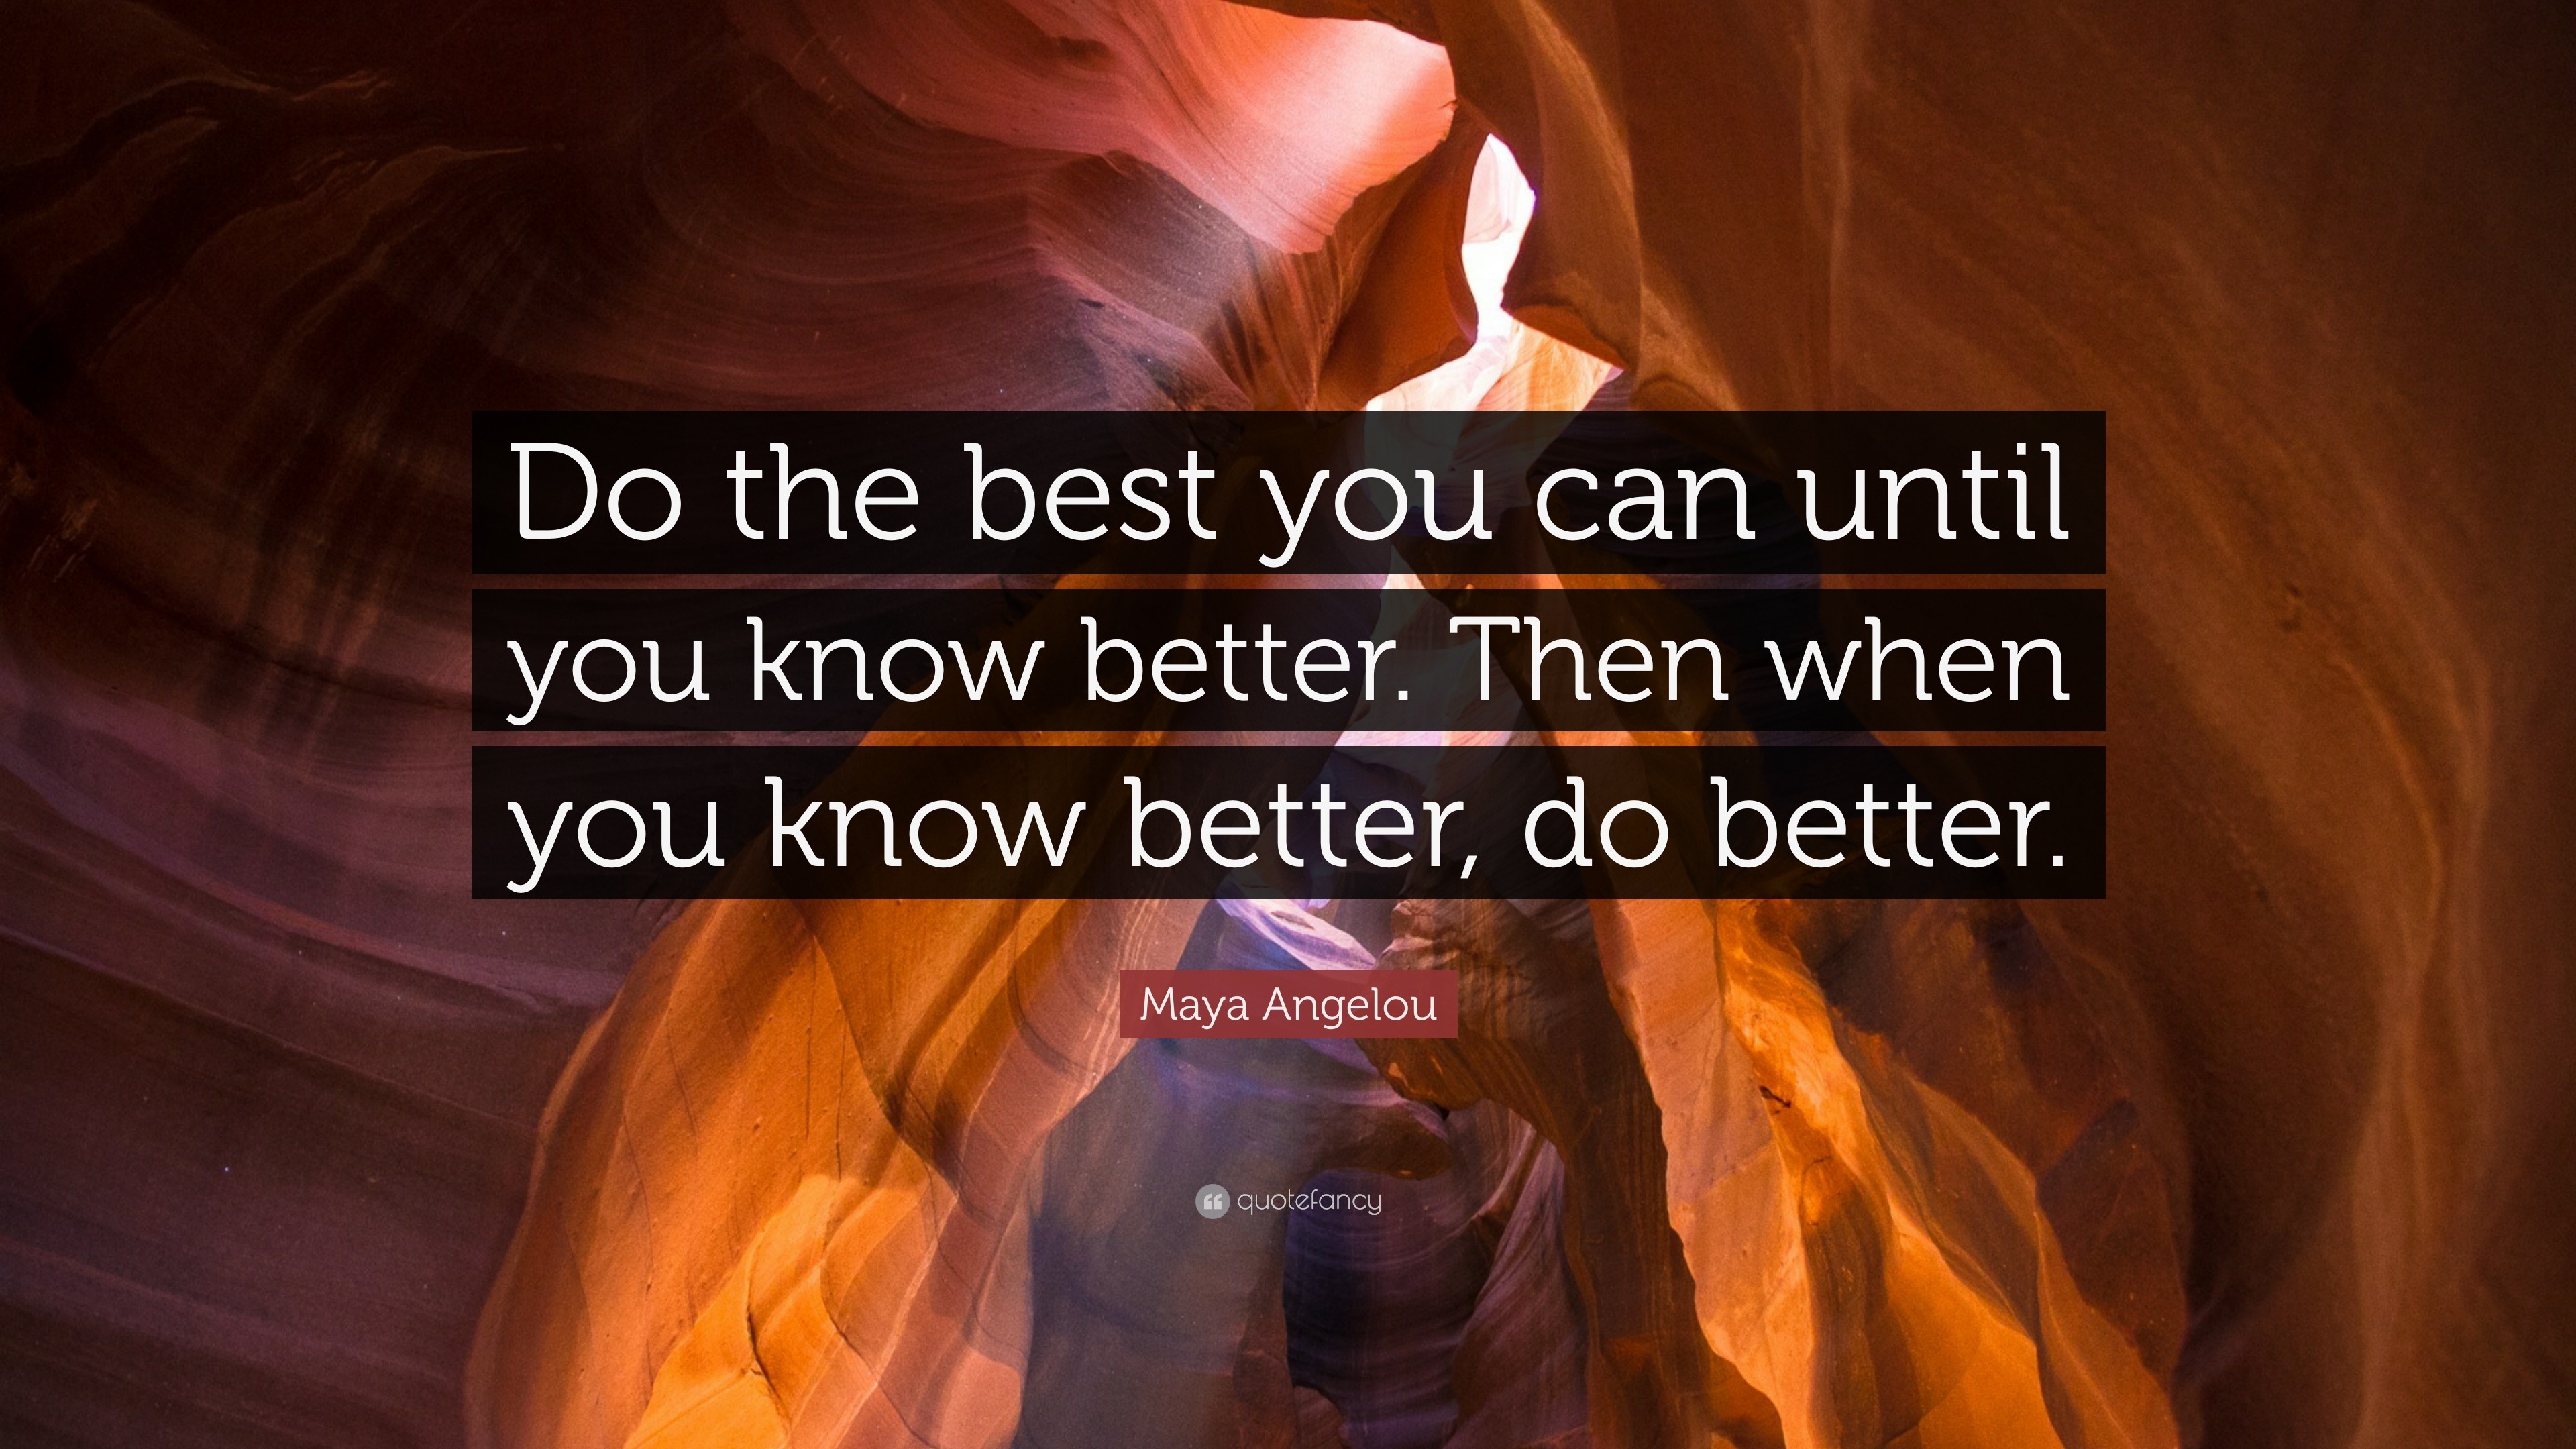 Maya Angelou Quote: “Do the best you can until you know better. Then ...